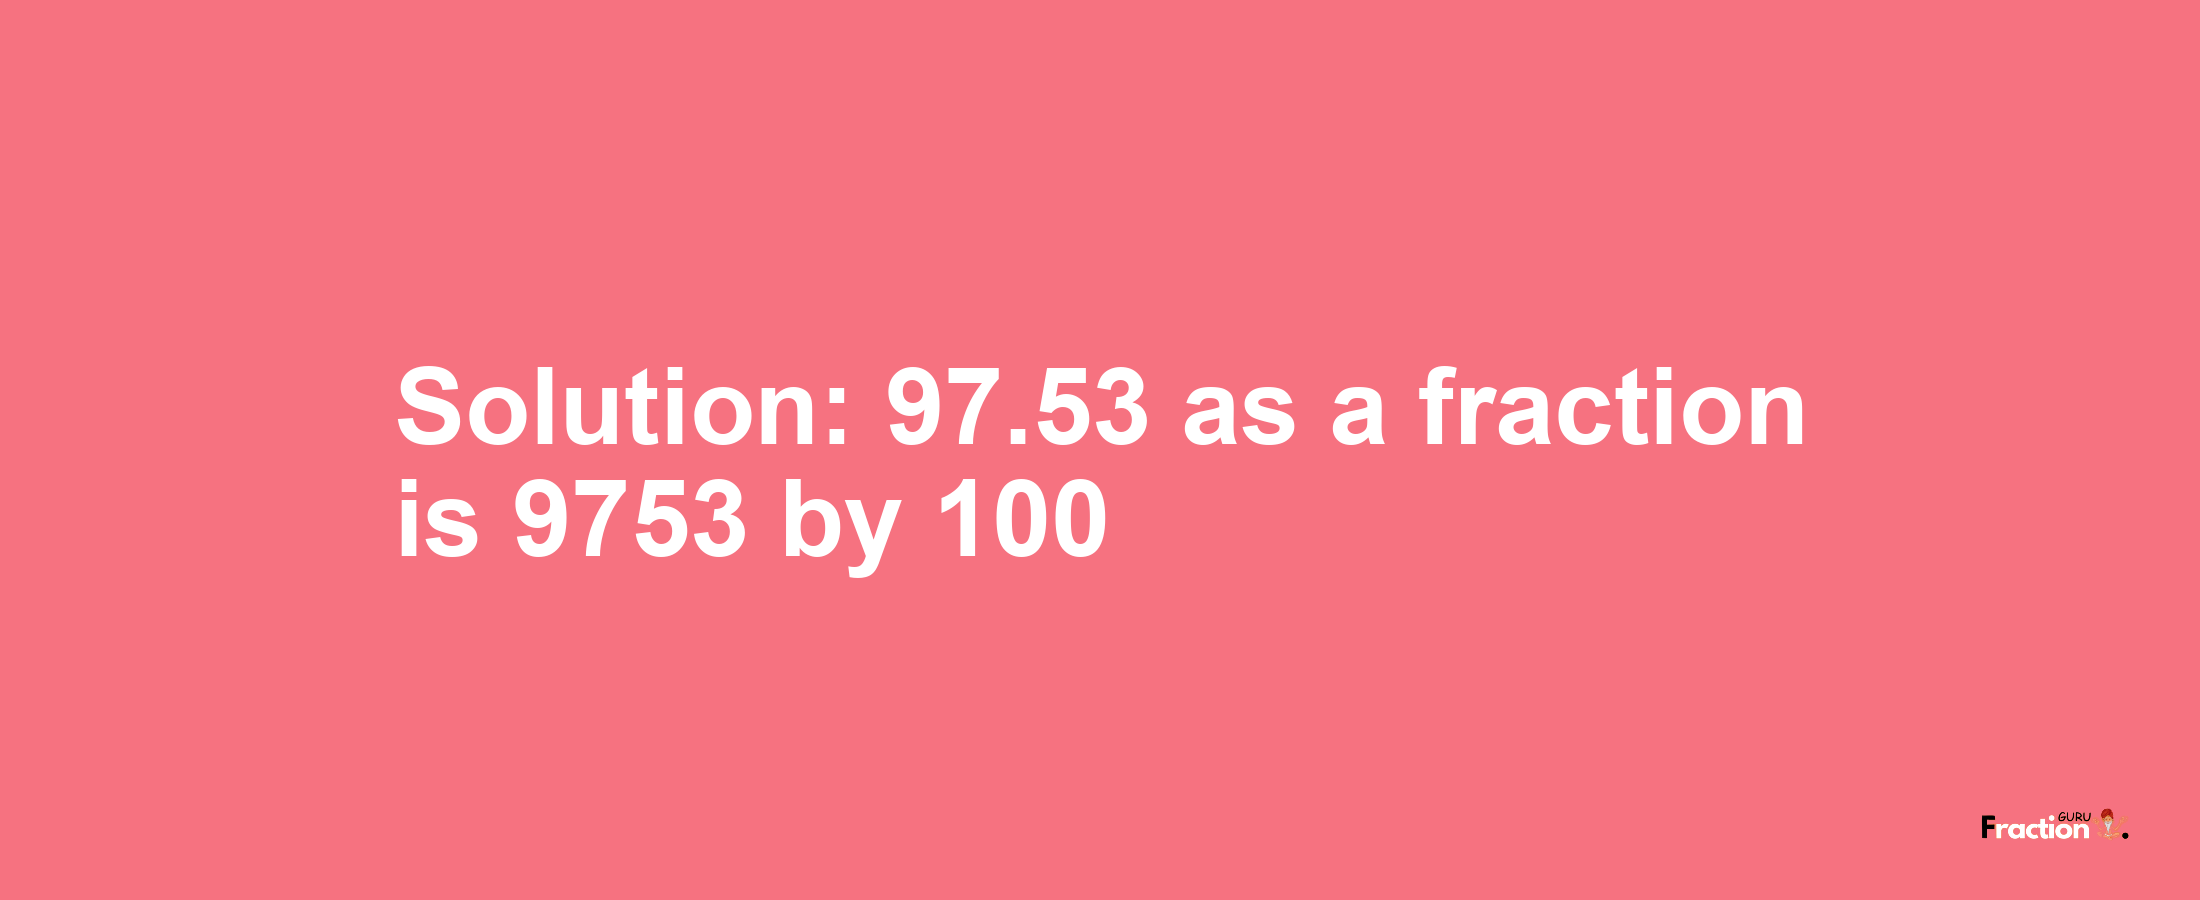 Solution:97.53 as a fraction is 9753/100